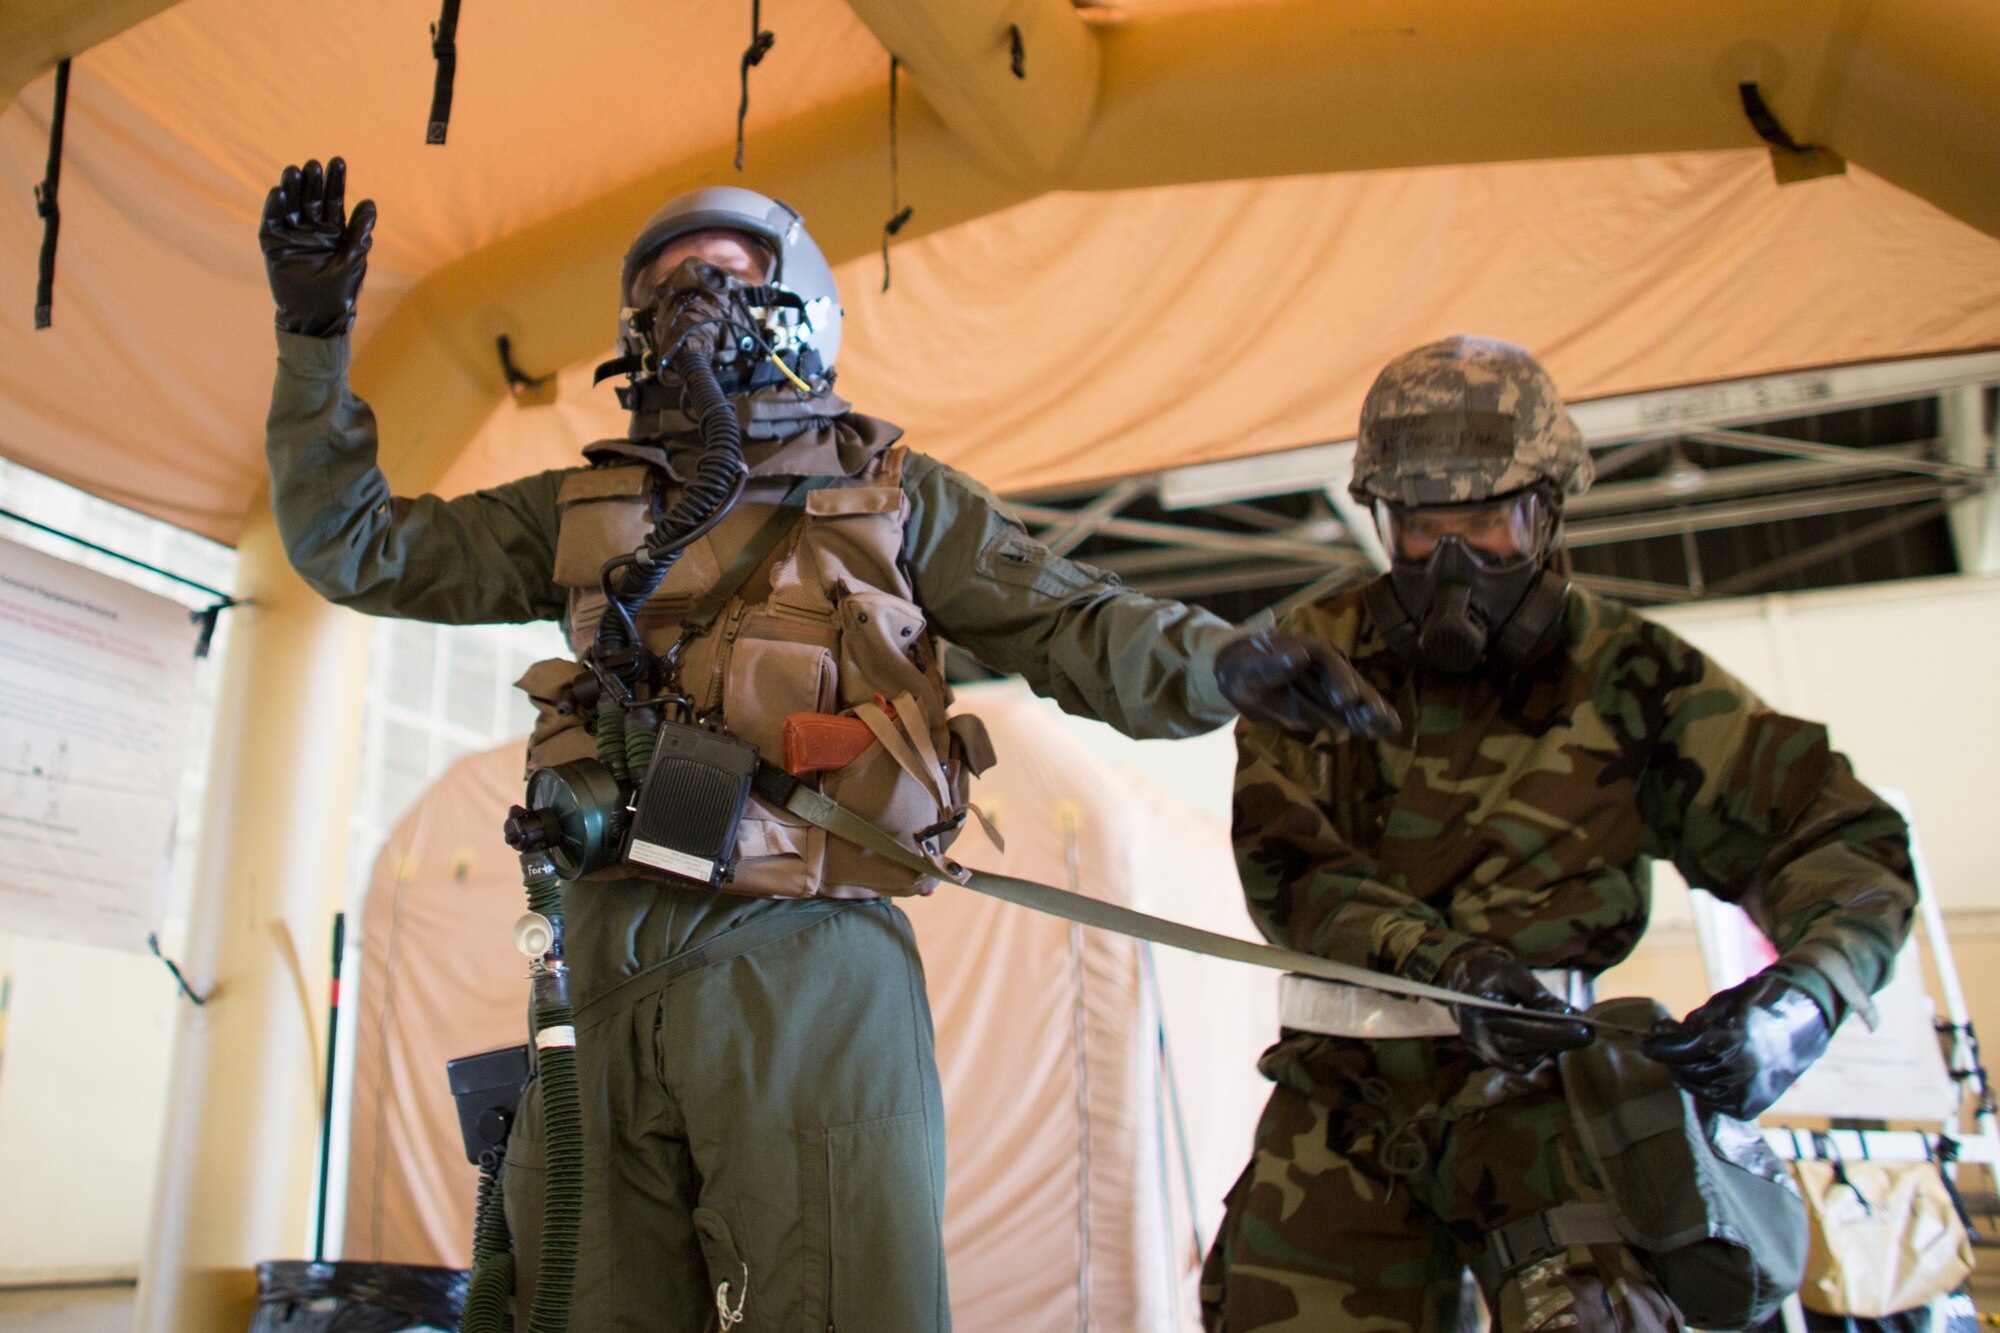 Airman 1st Class Ronald Flanagan, 374th Operations Support Squadron aircrew flight equipment, removes simulated potentially contaminated equipment during a Samurai Readiness Inspection at Yokota Air Base, Japan, May 20, 2015. Airmen from the 36th Airlift Squadron and 374th OSS performed aircrew decontamination procedures with the Lightweight Inflatable Decontamination System (LIDS). The LIDS takes about 20 minutes to set up and consists of four stations for rinsing off excess chemicals and a process to dispose of contaminated clothing and aircrew equipment. (U.S. Air Force photo by Osakabe Yasuo/Released)